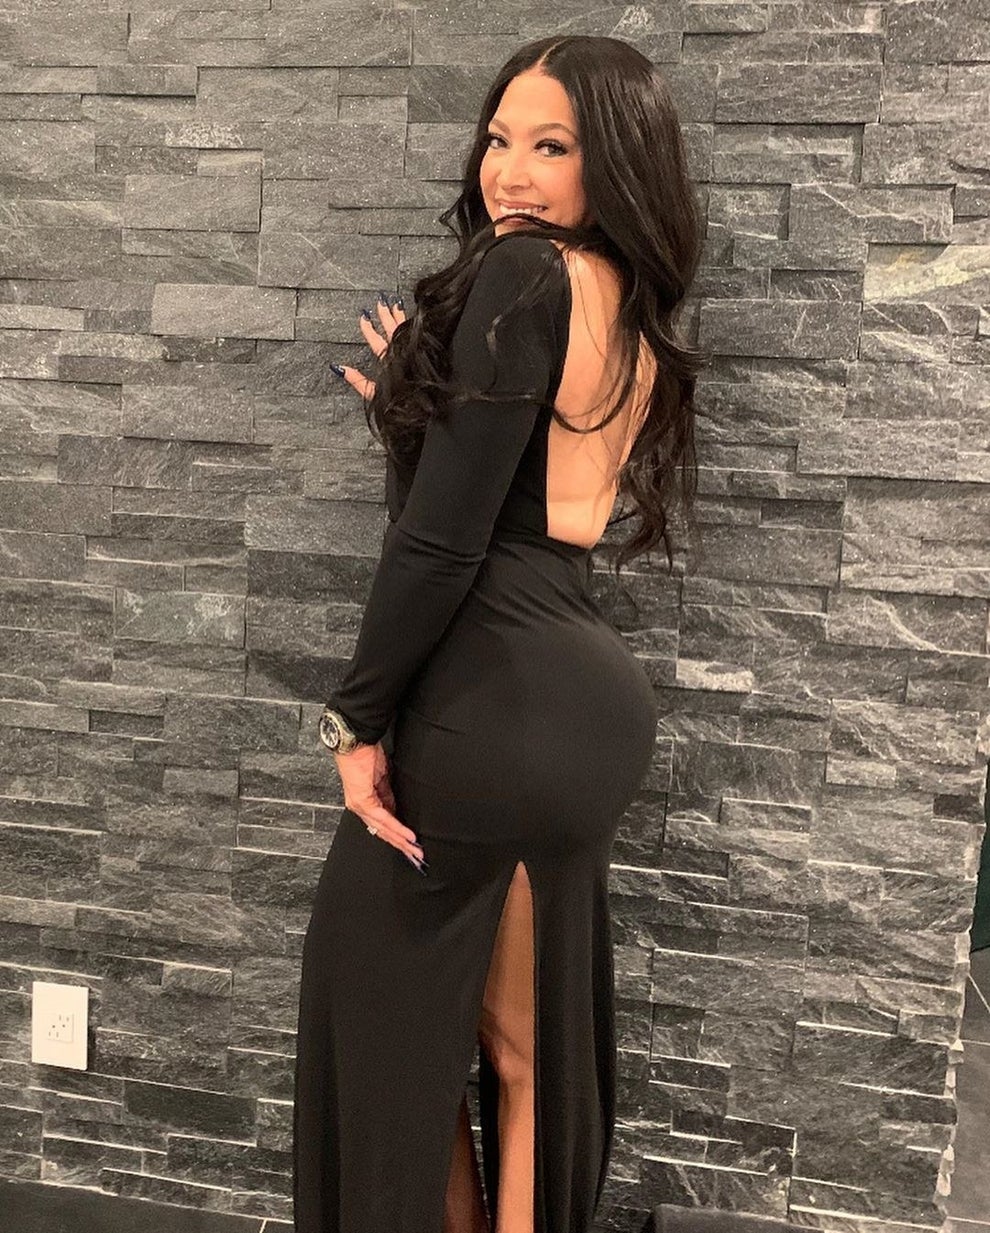 People Accused Jordyn Woods Of Having A Butt Lift After She Posted